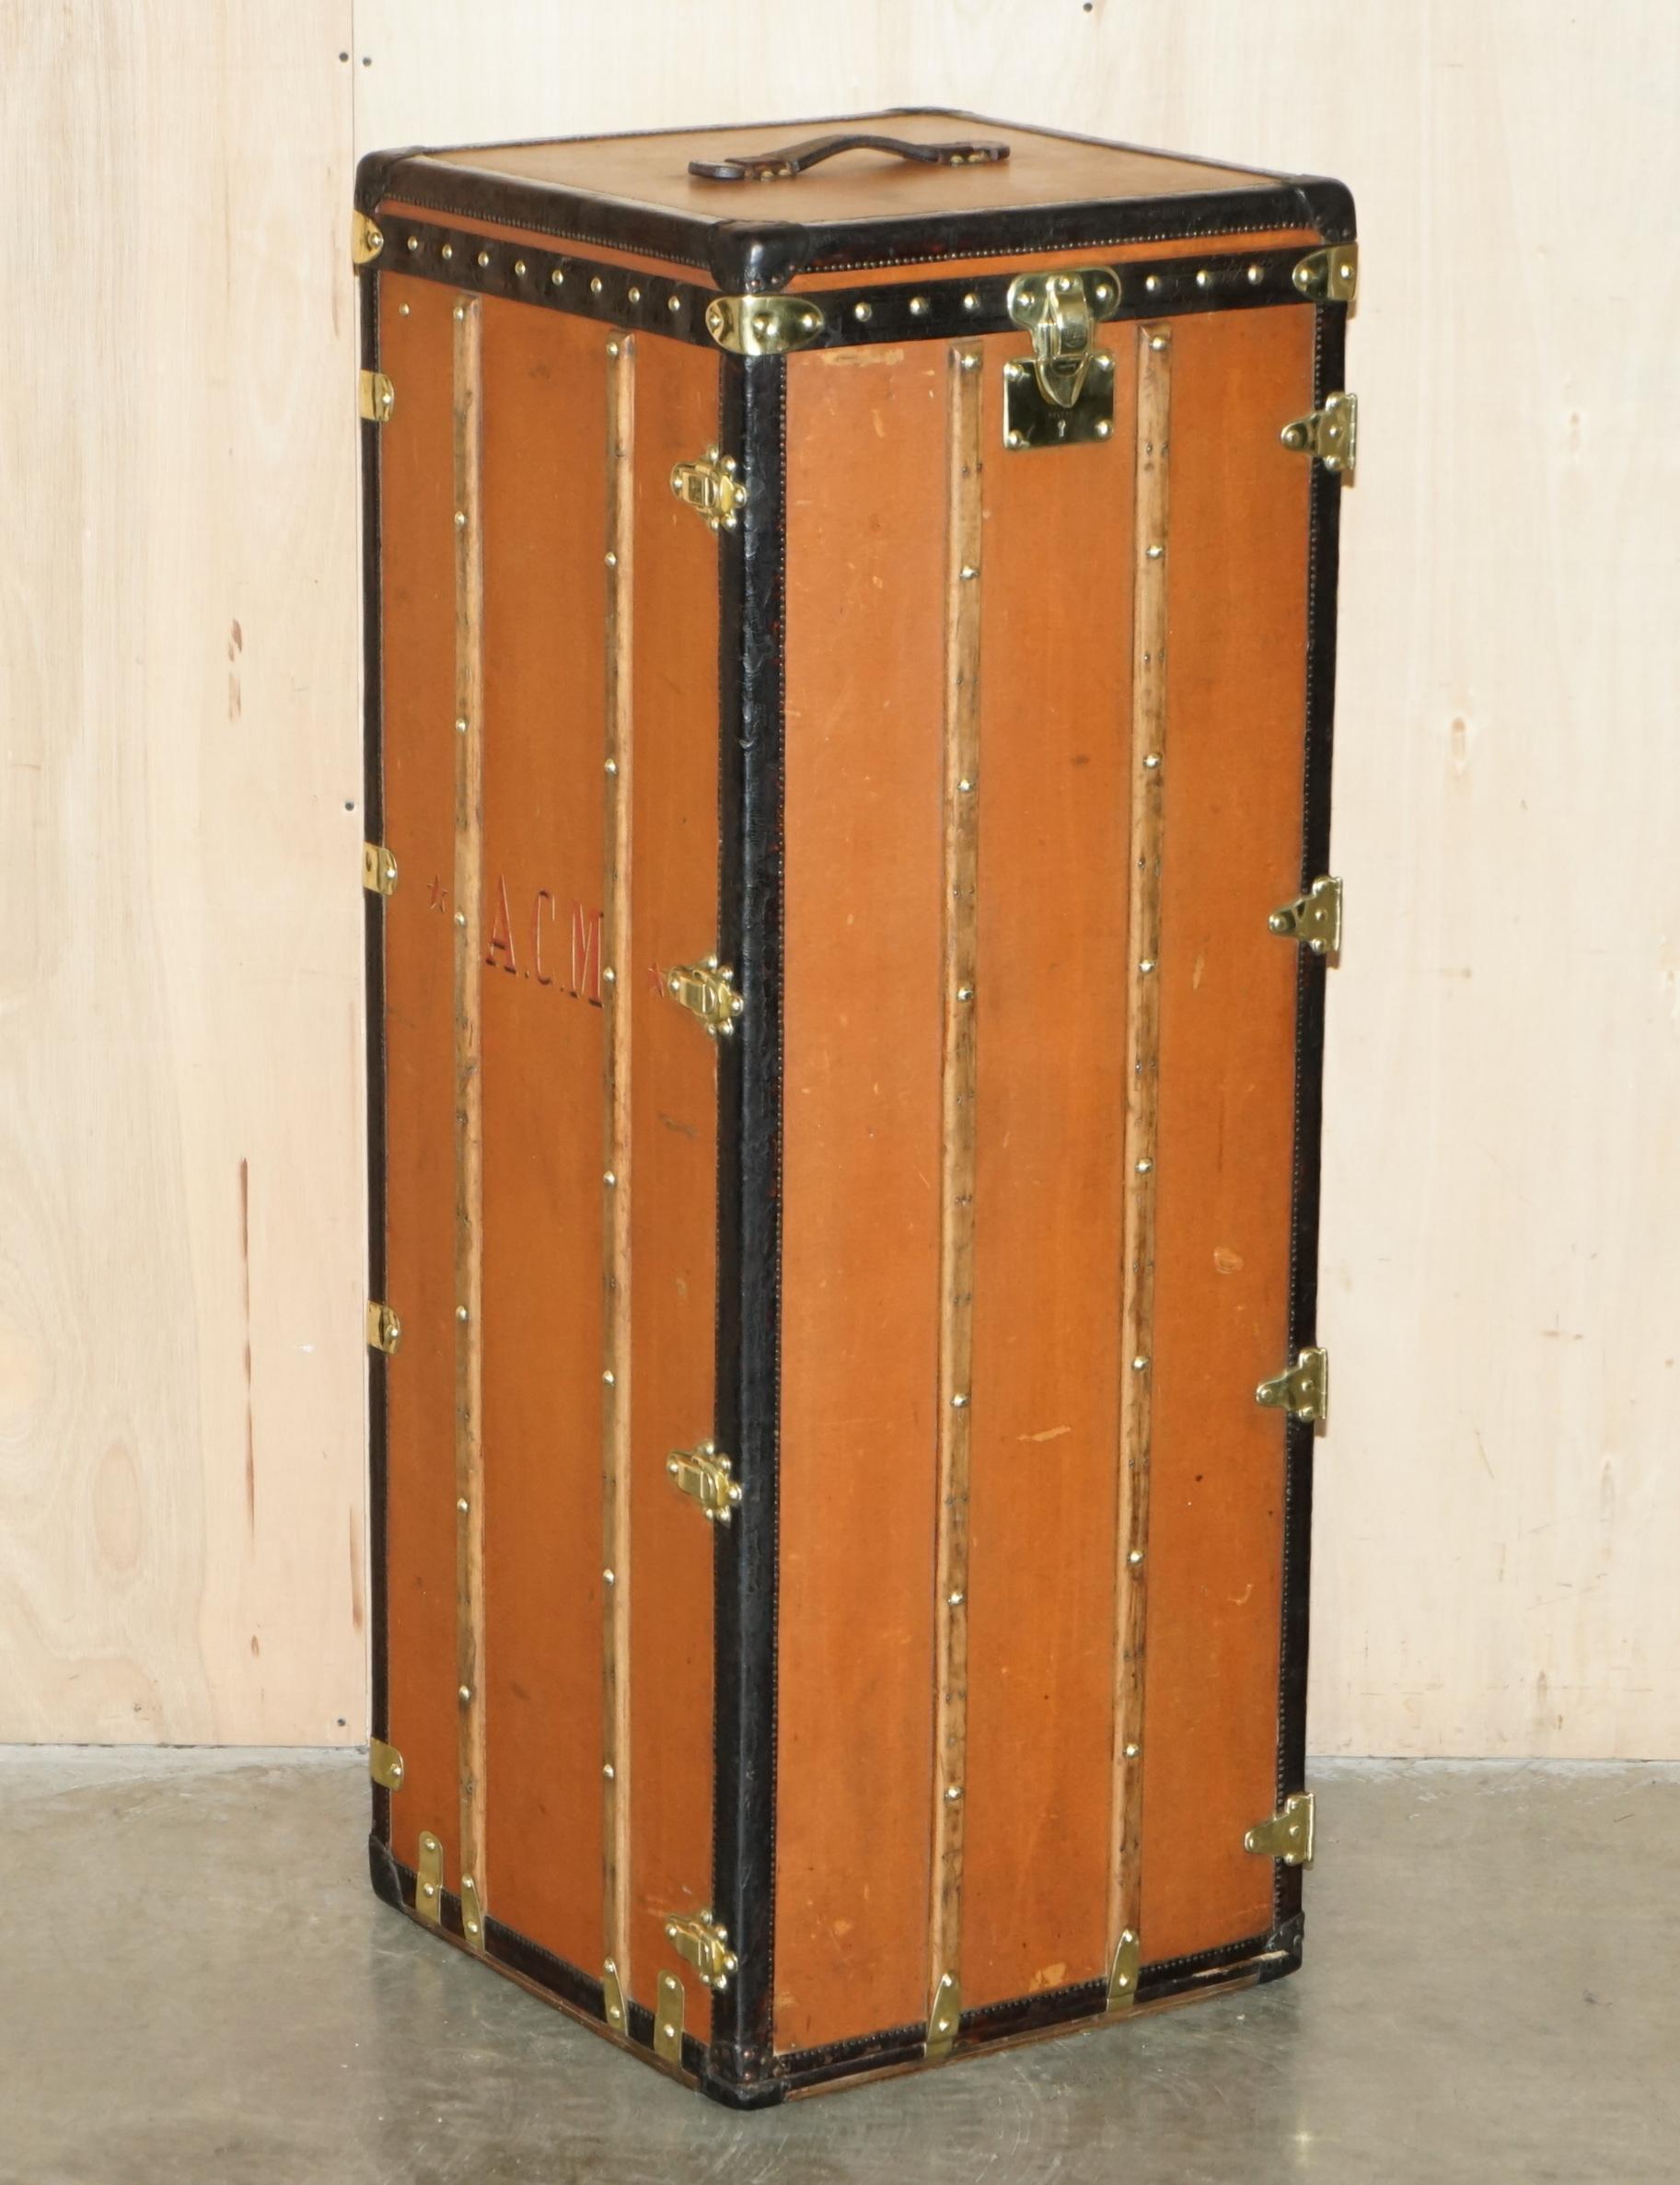 Royal House Antiques

Royal House Antiques is delighted to offer for sale this absolutely stunning fully restored original Louis Vuitton 1910 steamer wardrobe, Malle Penderie trunk in orange canvas

Please note the delivery fee listed is just a